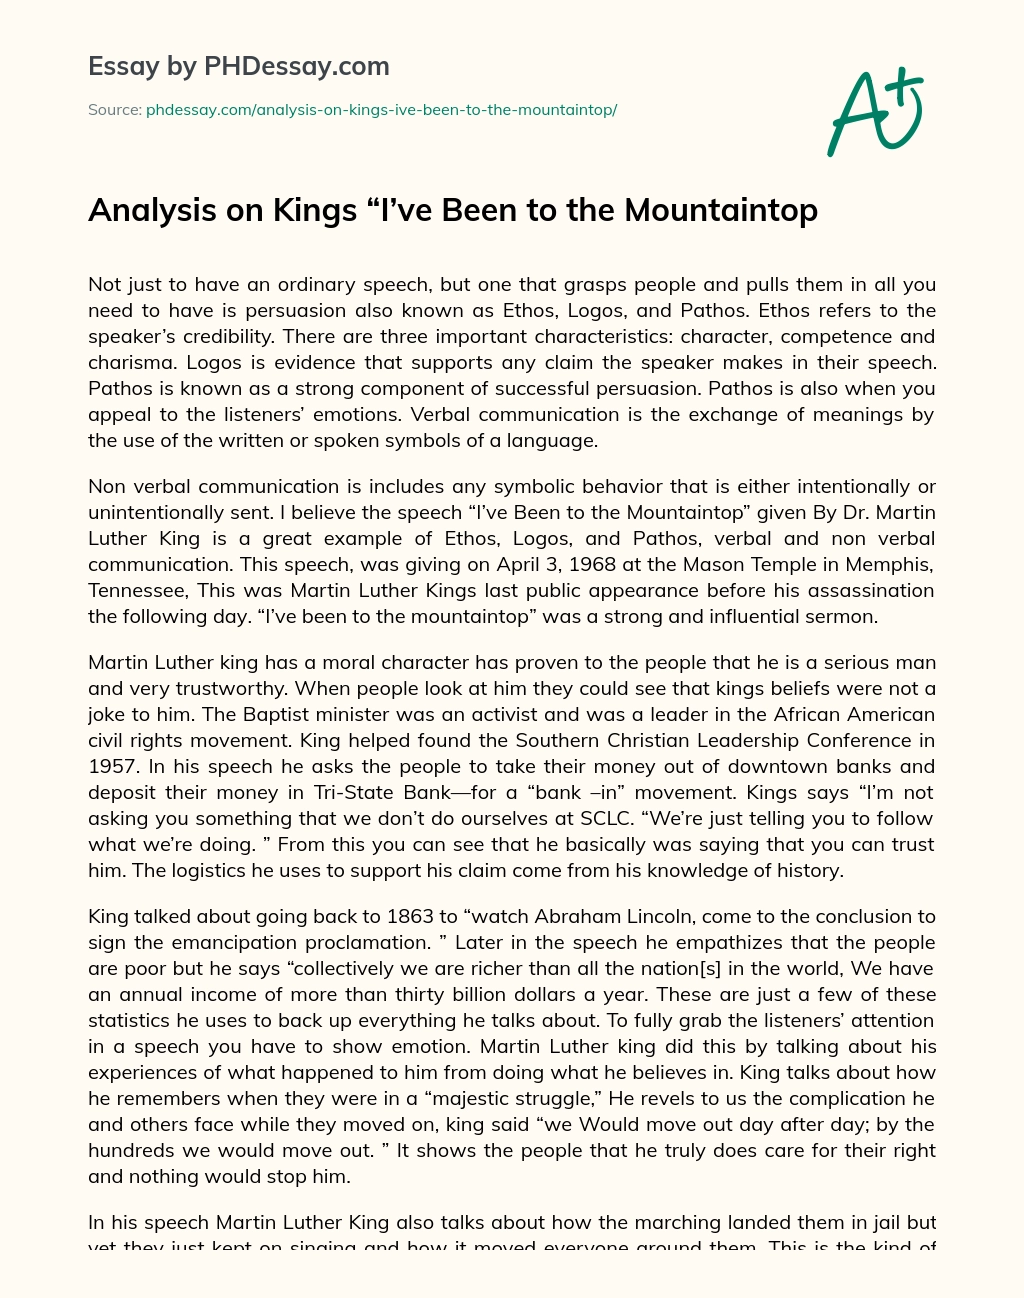 Analysis on Kings “I’ve Been to the Mountaintop essay